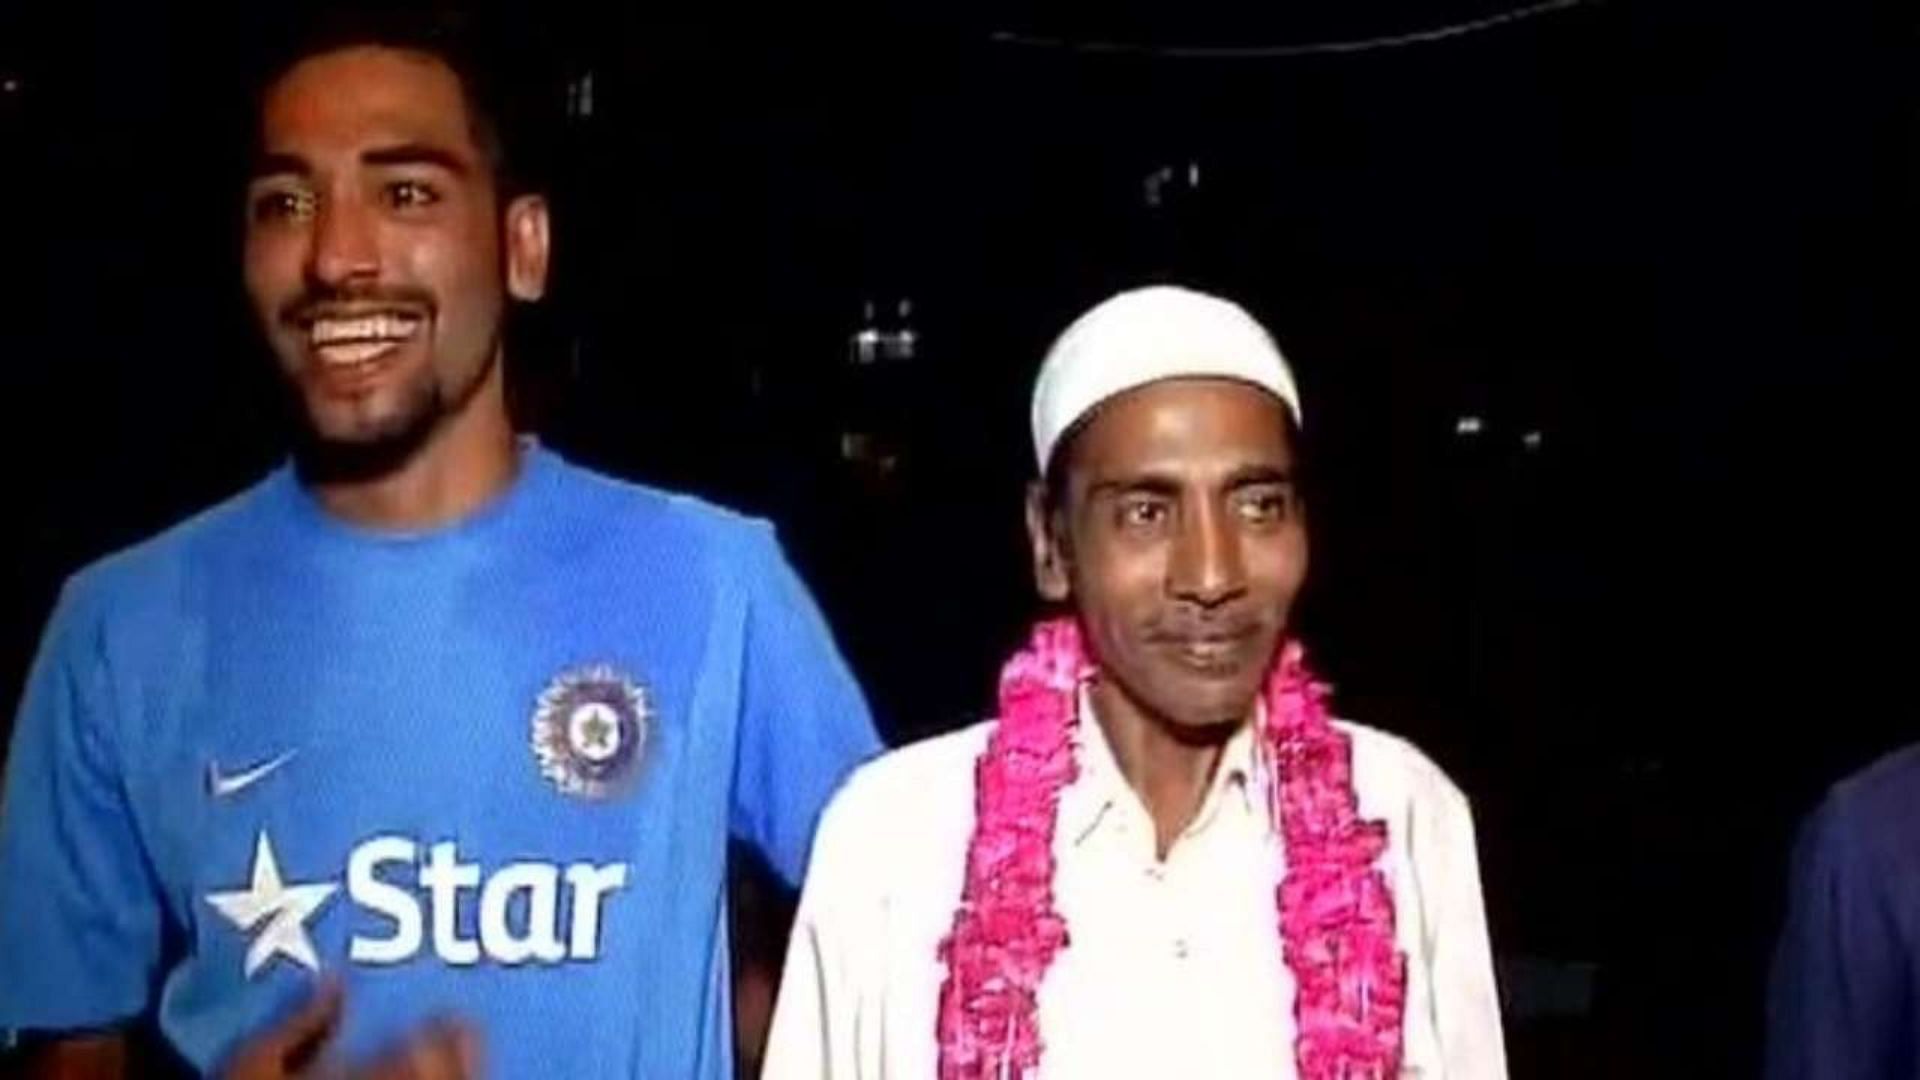 Mohammed Siraj (L) with his father (P.C.:Twitter)